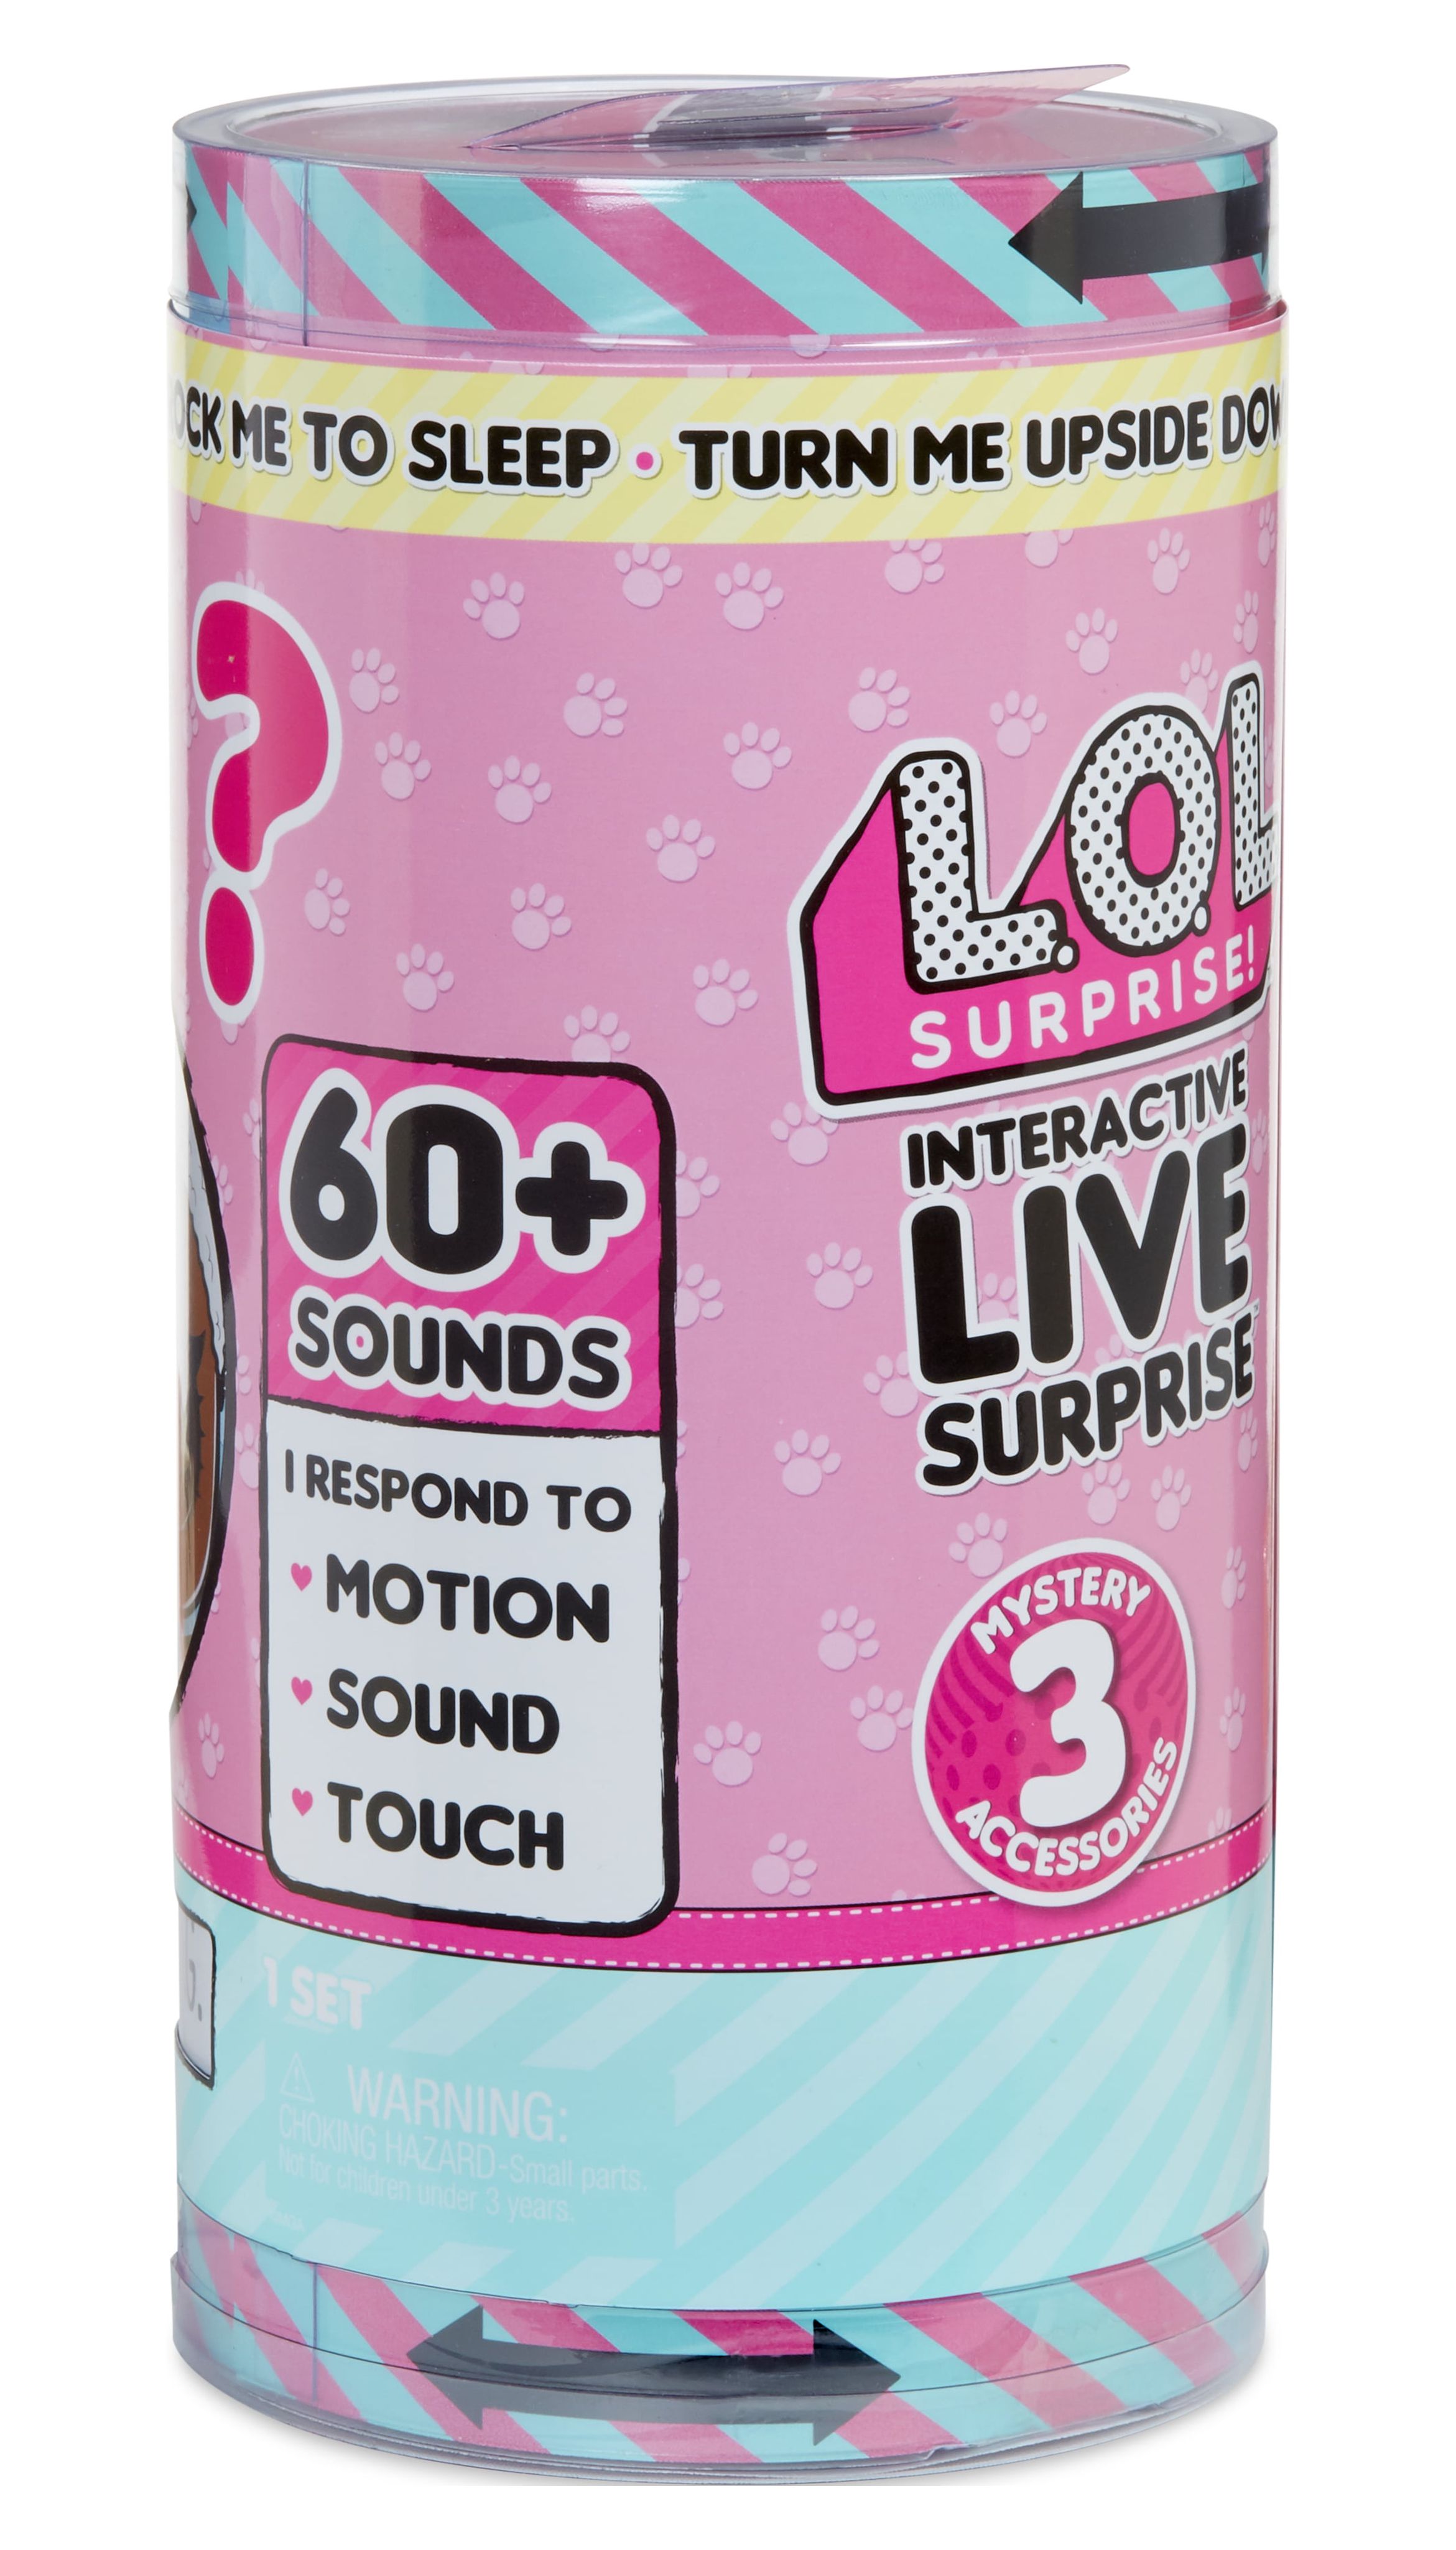 LOL Surprise Interactive Live Surprise Pet Royal Kitty with Realistic Sounds, Motions and Responses - image 4 of 5